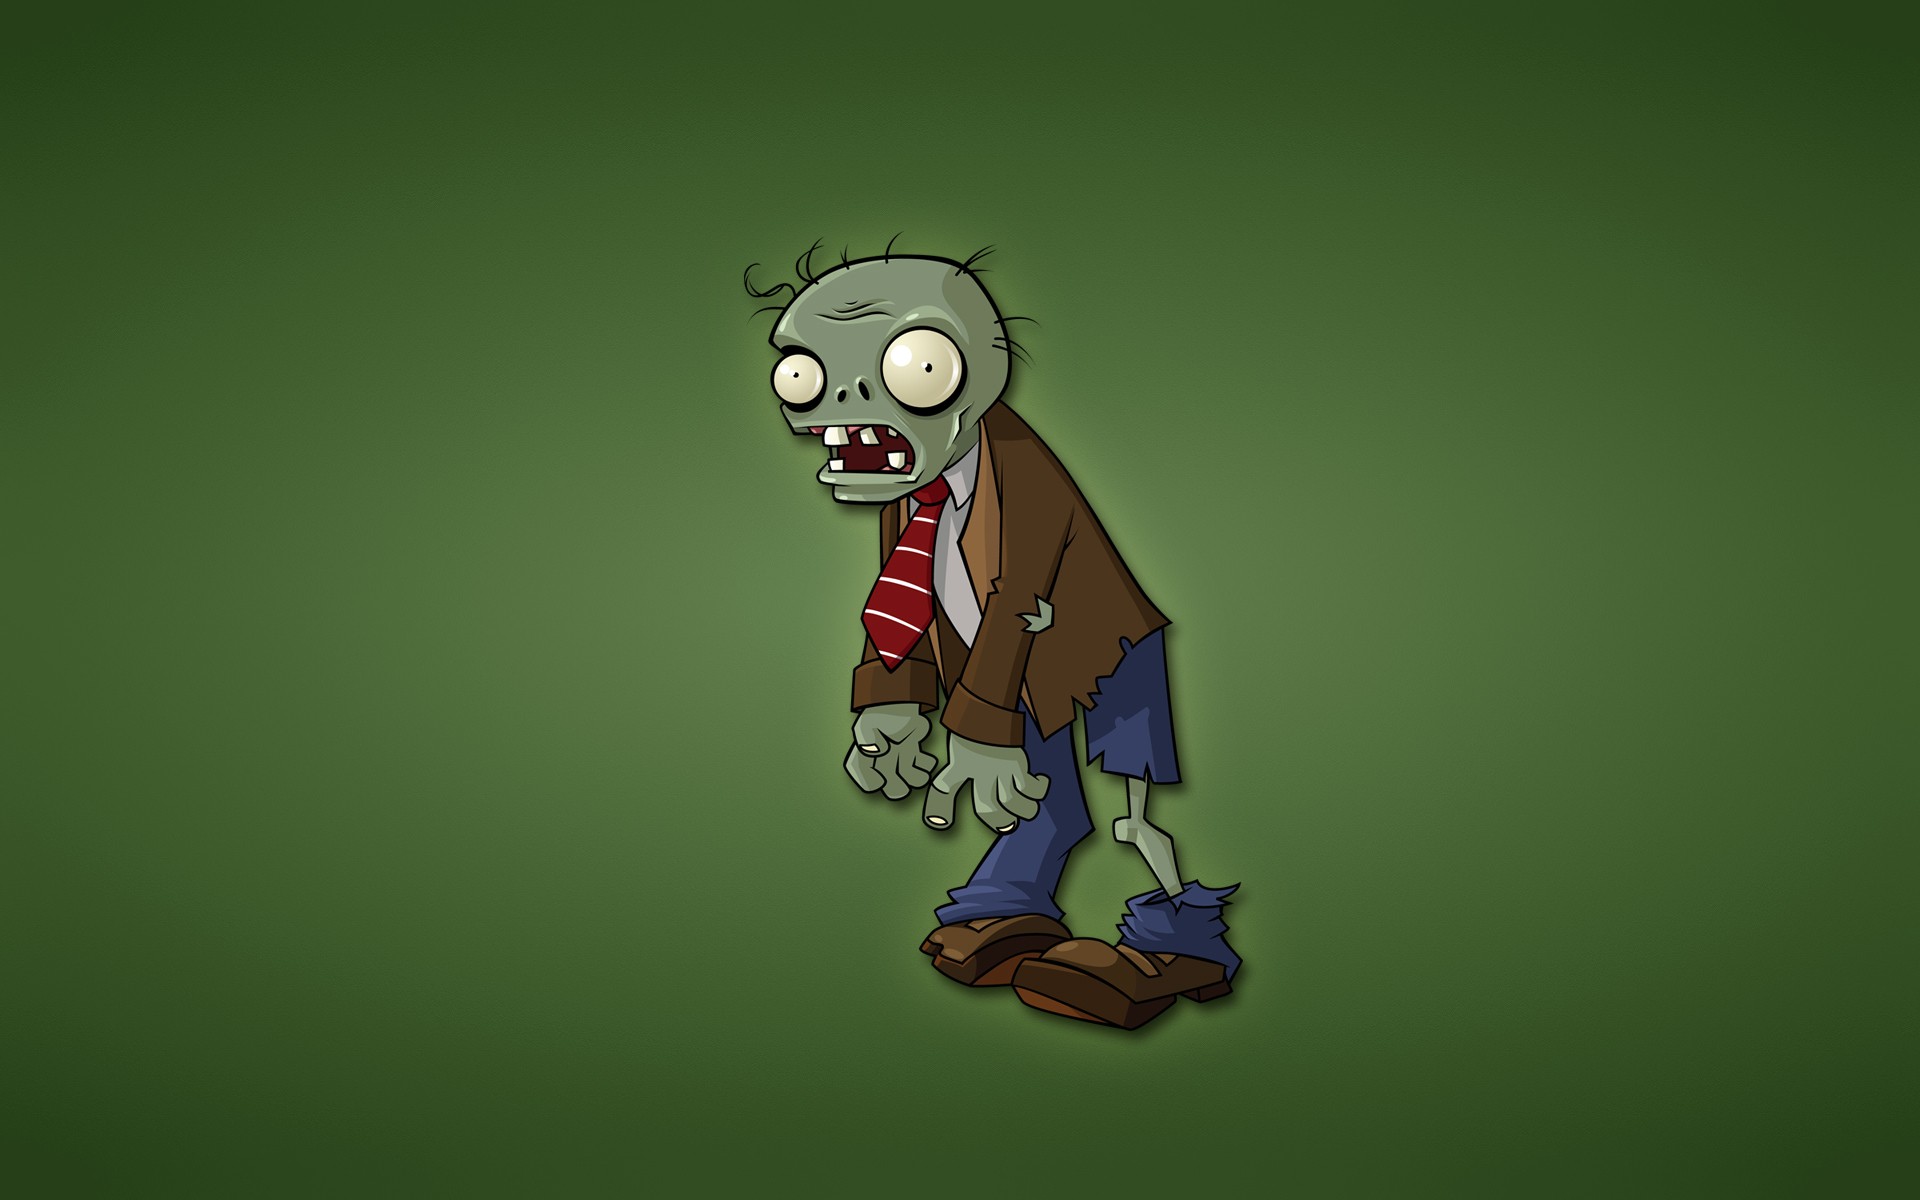 General 1920x1200 minimalism zombies Plants vs. Zombies video games green green background video game art EA Games